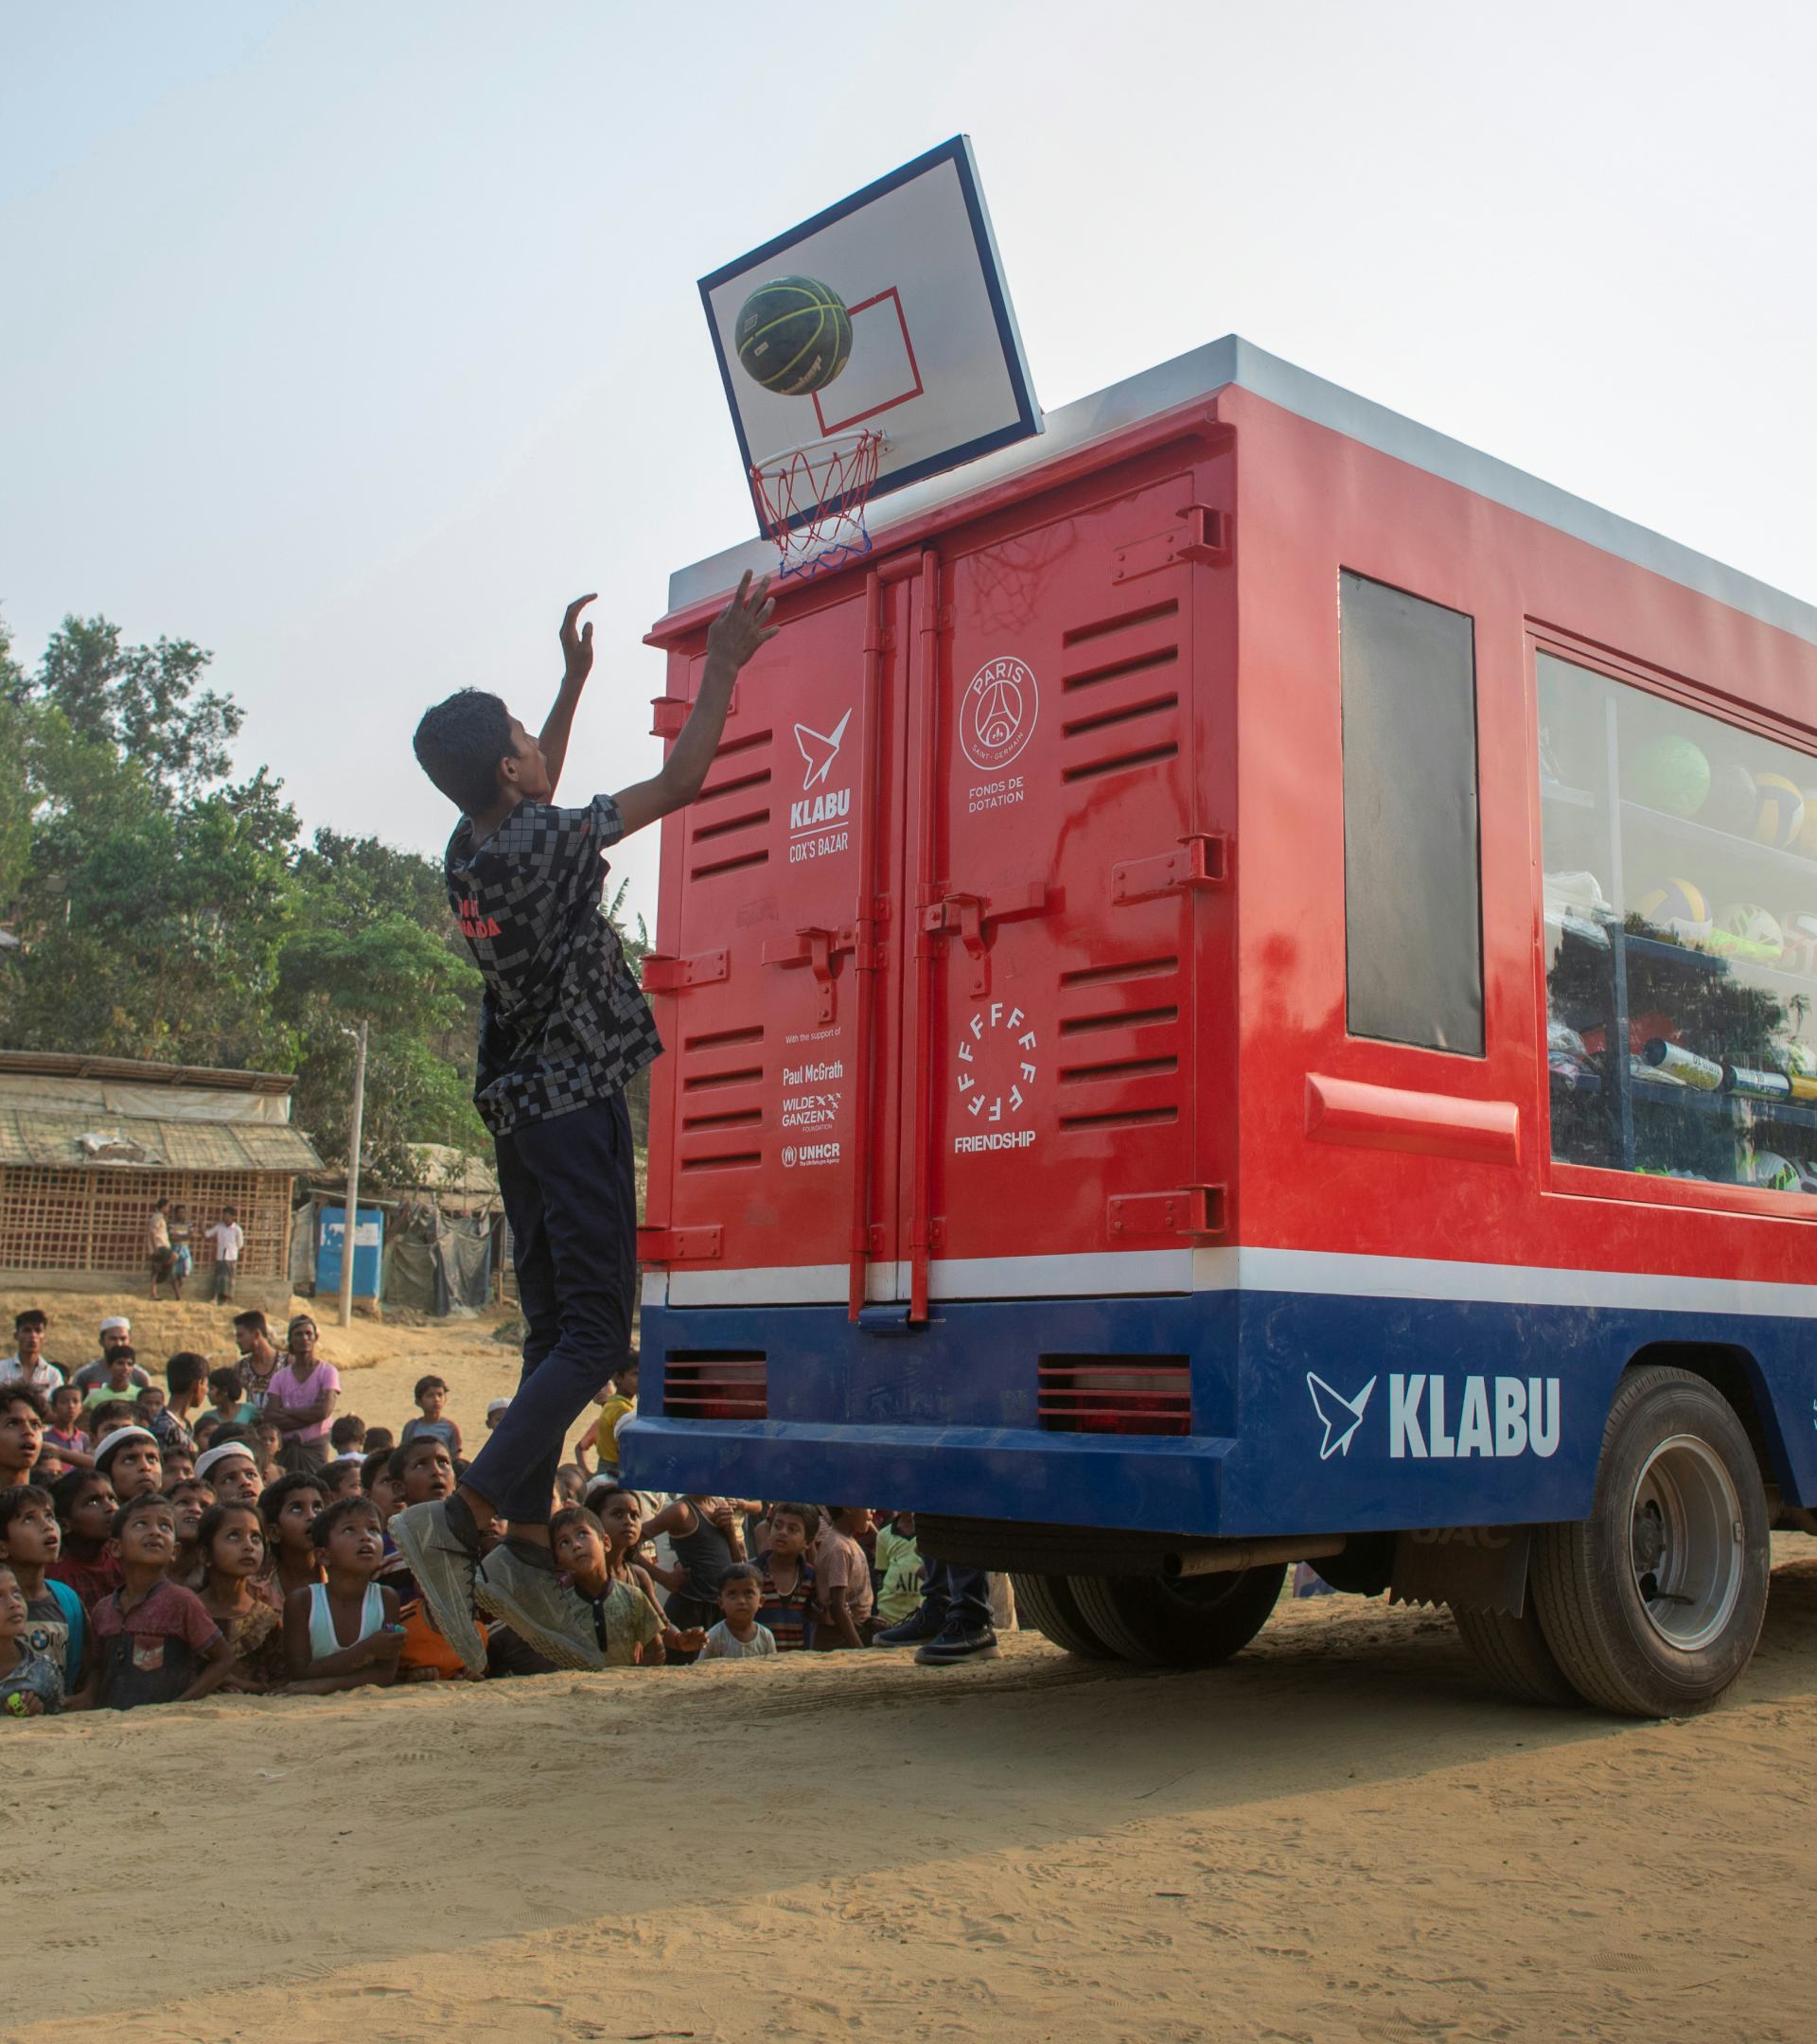 Child in Bangladesh playing basketball by a mobile sports library